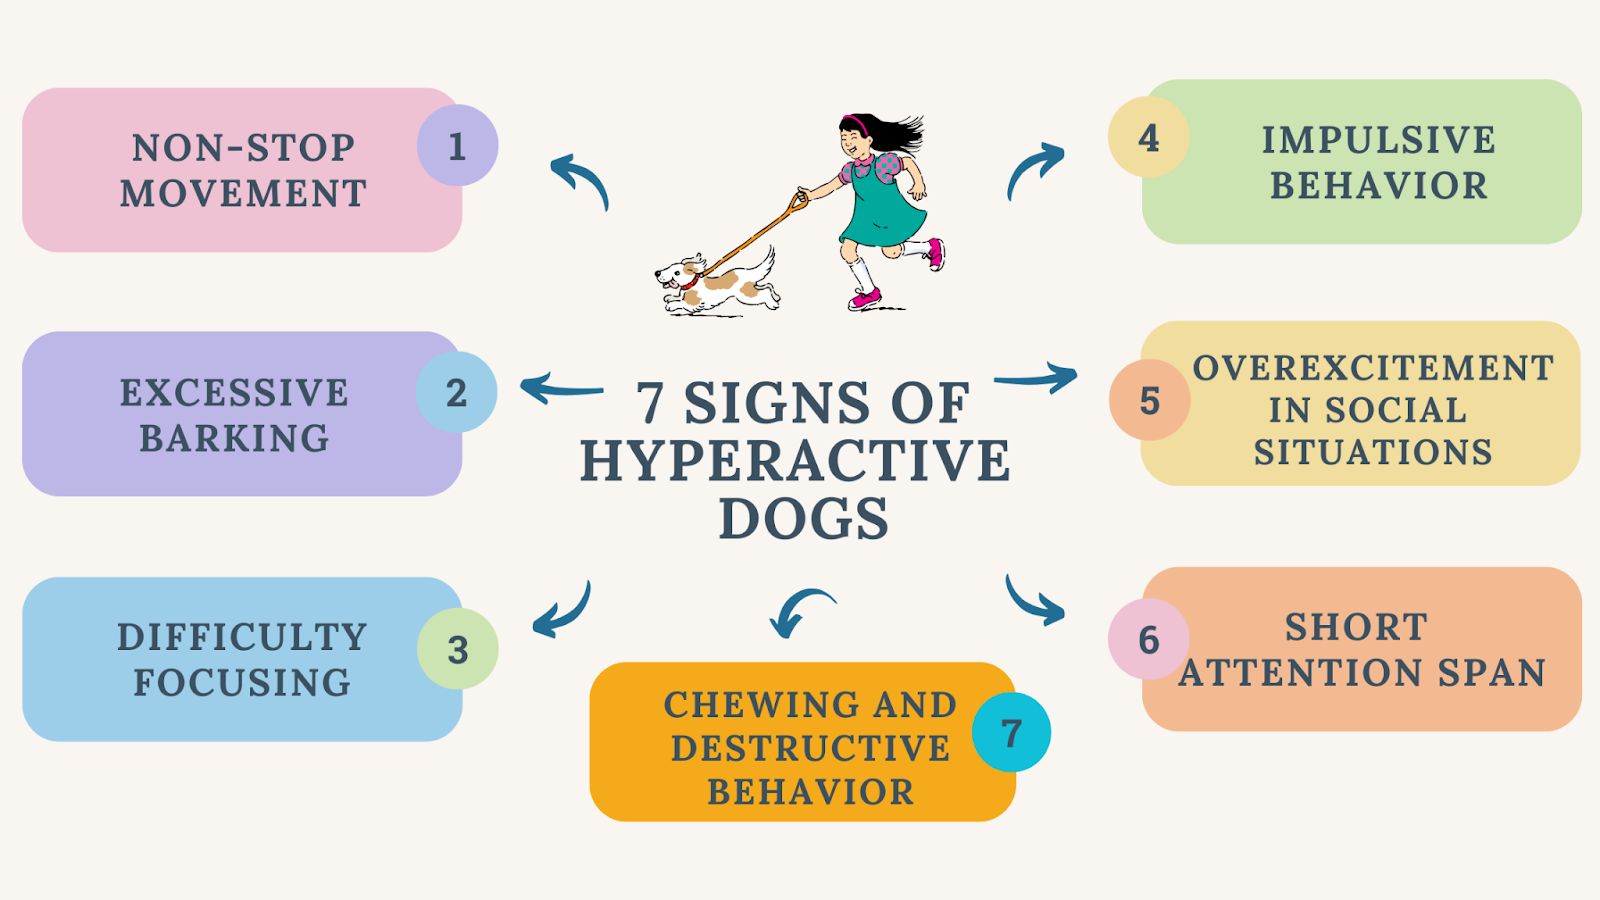 Signs of hyperactive dogs